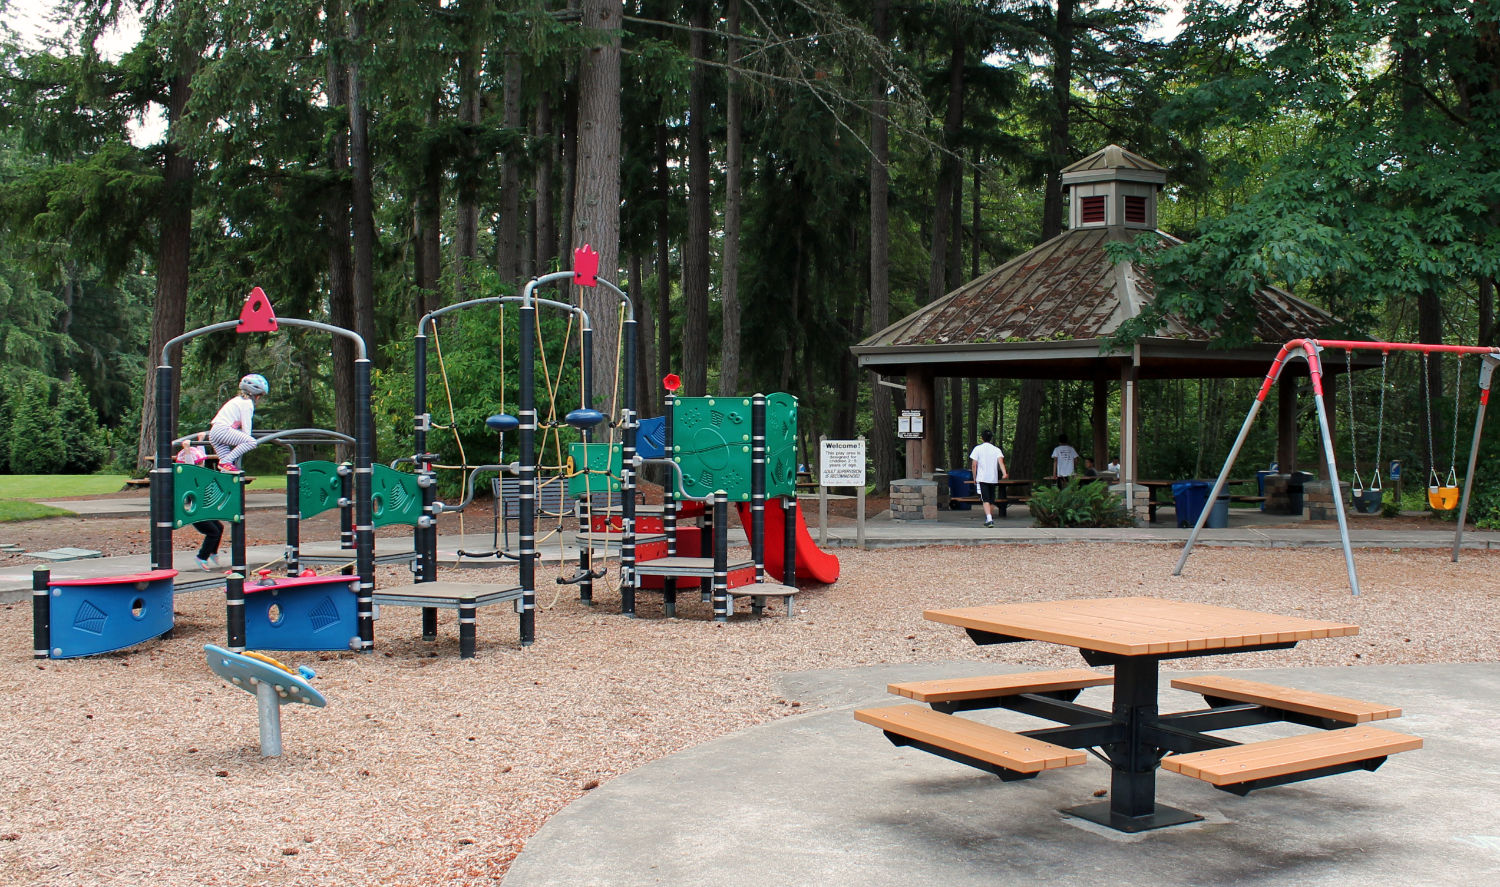 ebright creek park playground, with swingset and play structure over wood chip surface, in front of covered picnic shelter